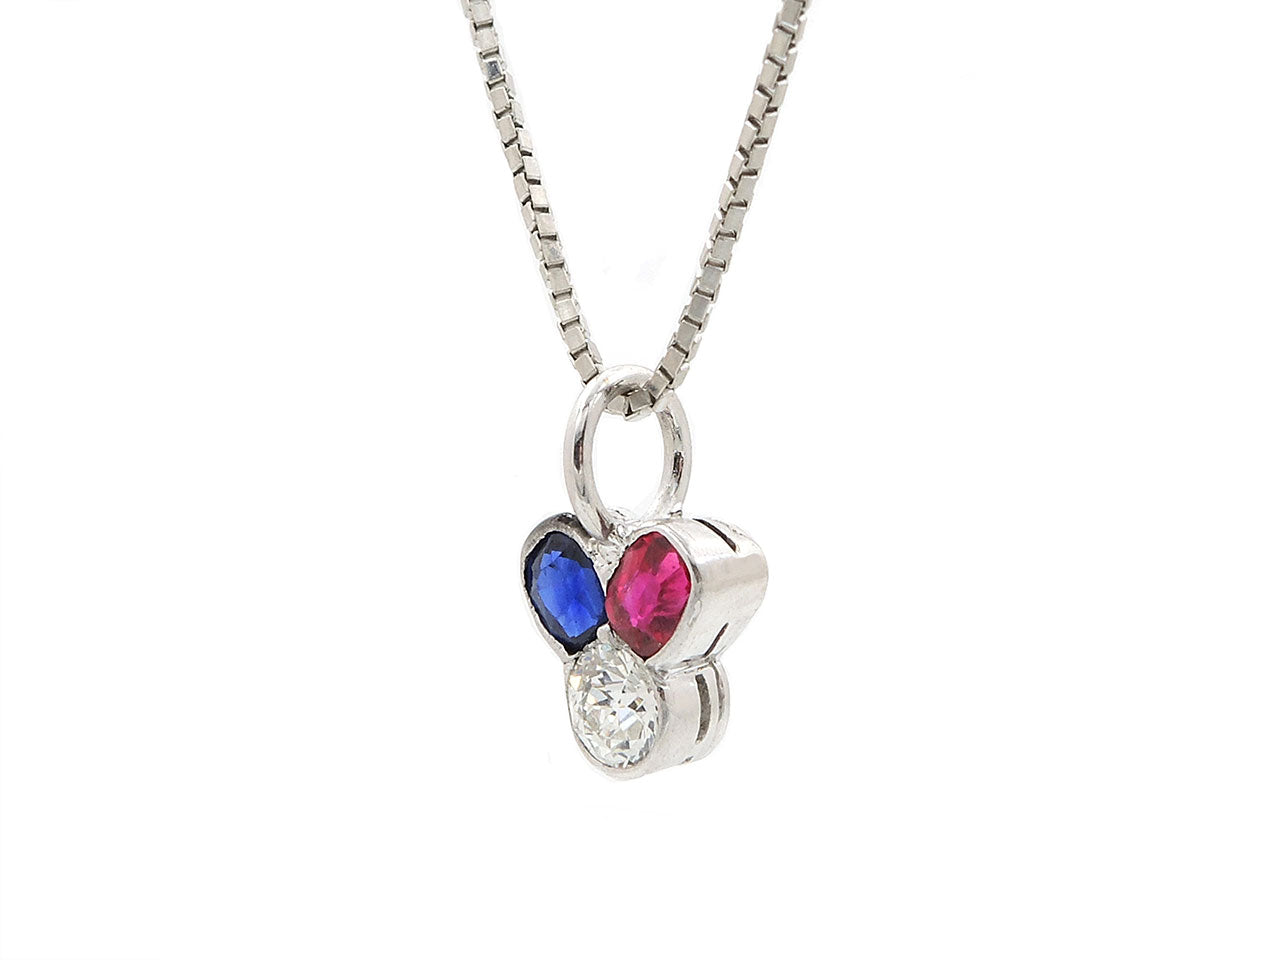 Ruby, Sapphire and Diamond Pendant Necklace in Platinum and 18K